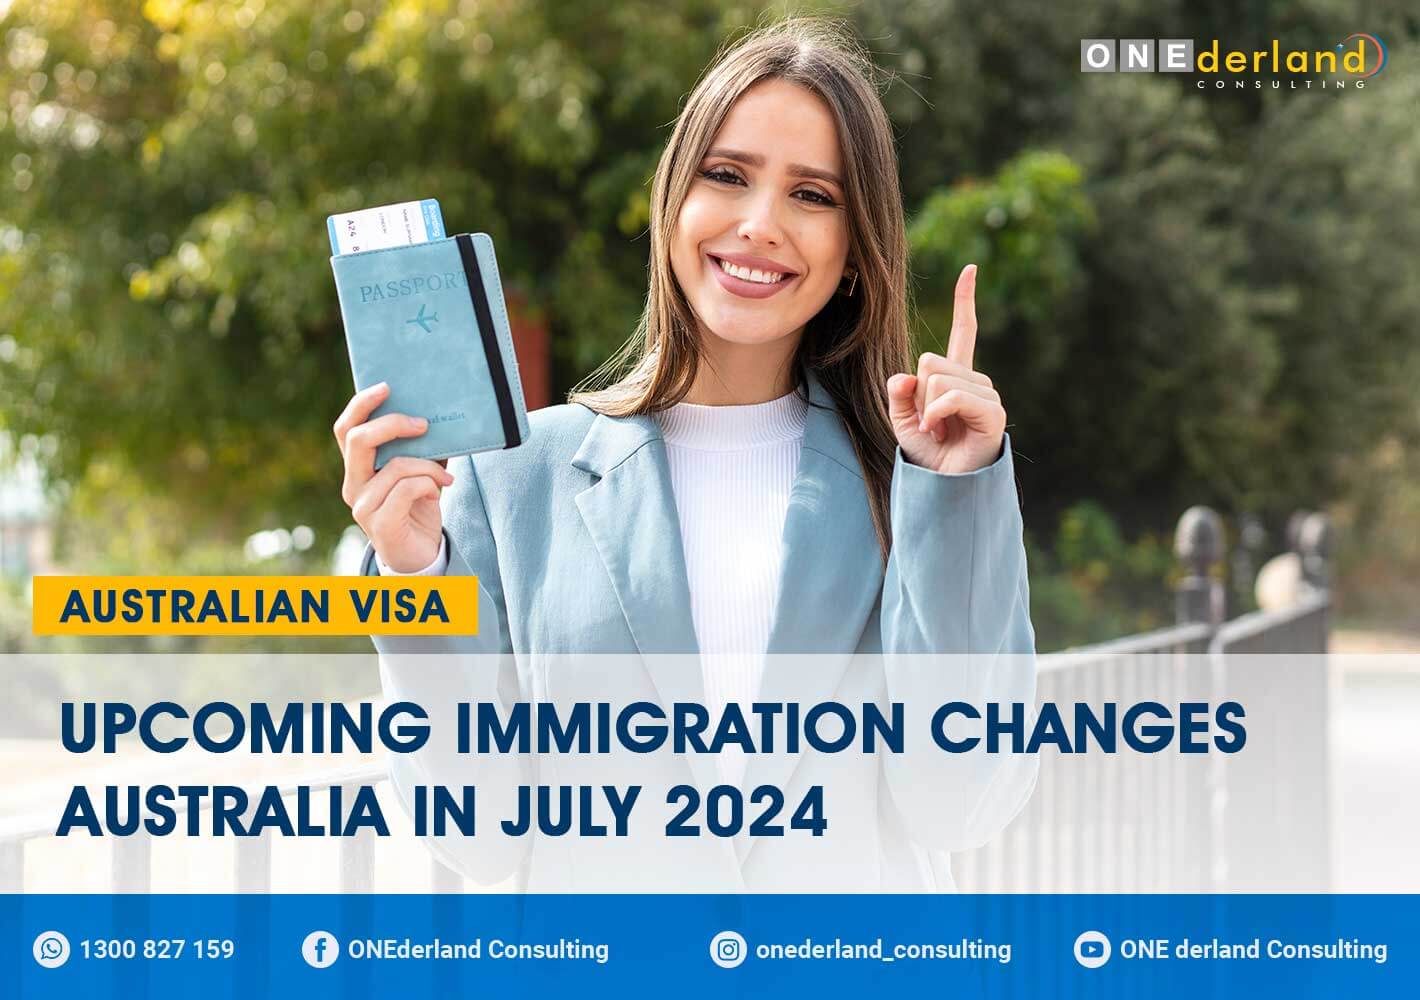 Upcoming Immigration Changes Australia: New Visa Program and Expected Visa Fee Changes